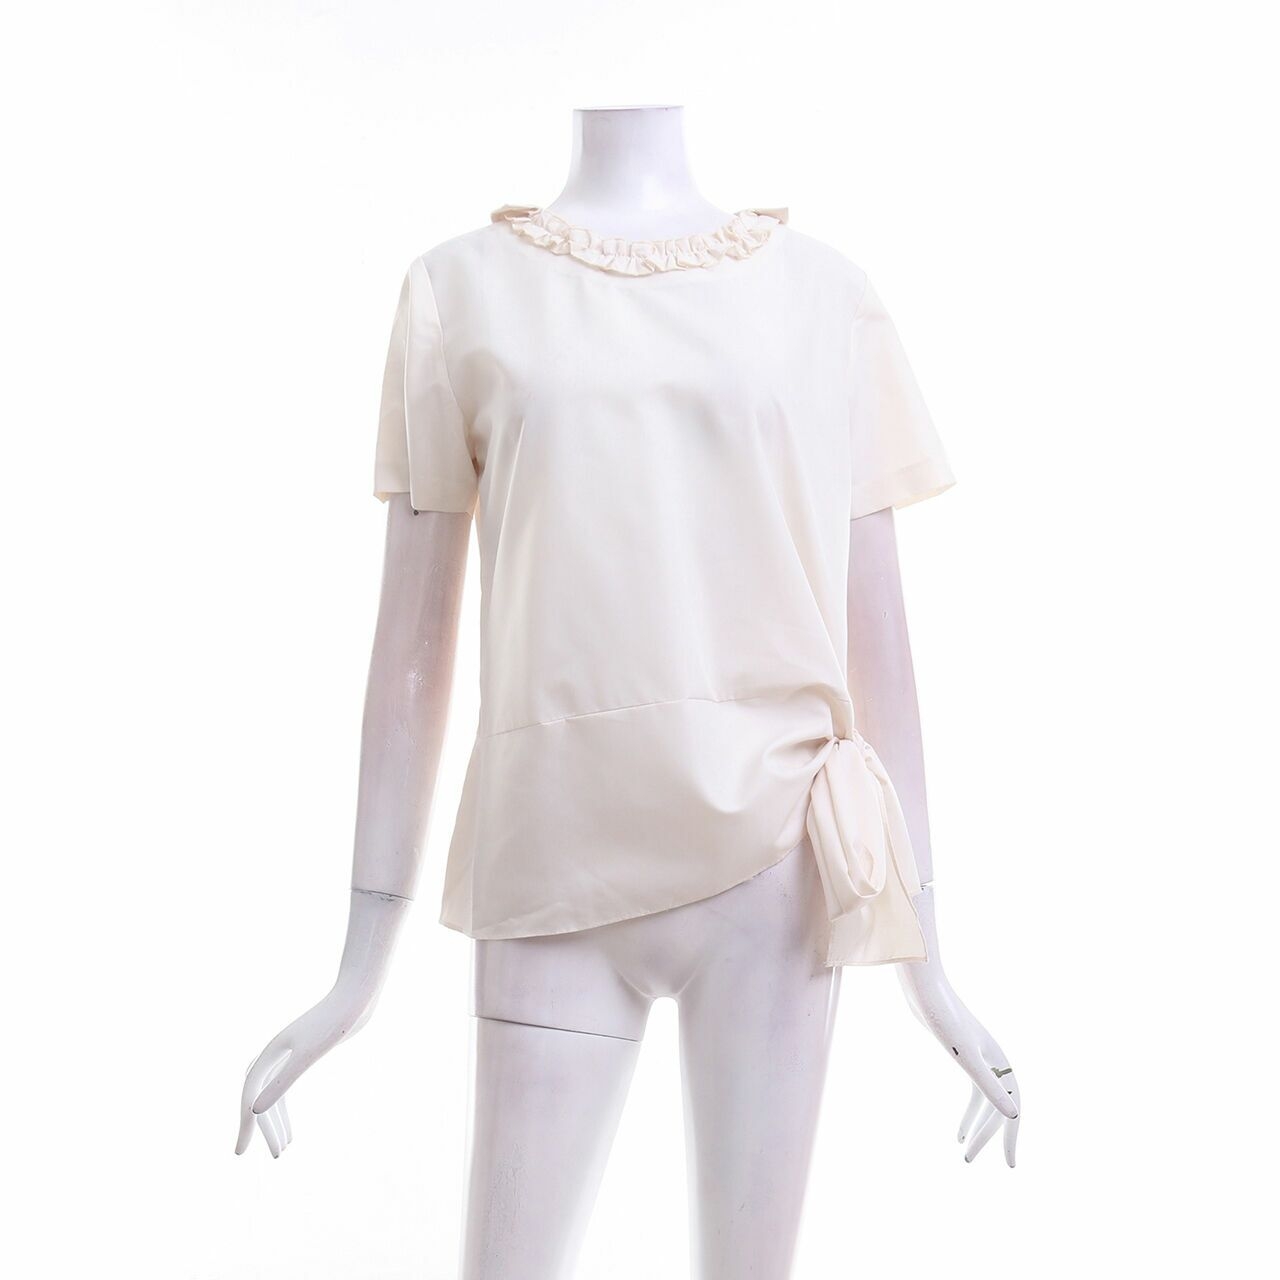 Krom Collective Cream Blouse